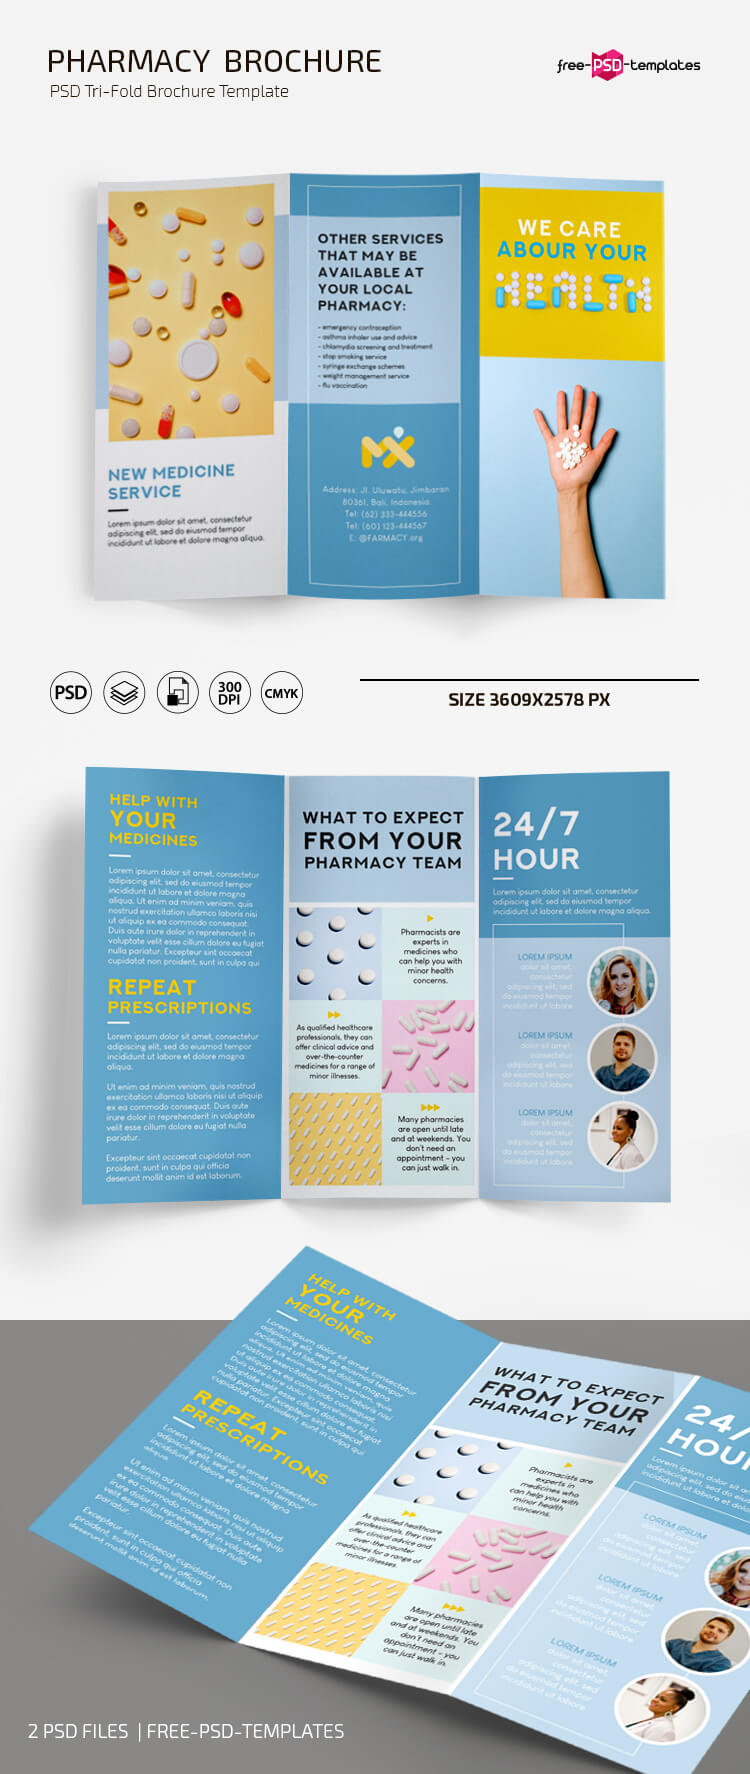 Free Pharmacy Brochure Template In Psd + Ai | Free Psd Templates Throughout Pharmacy Brochure Template Free